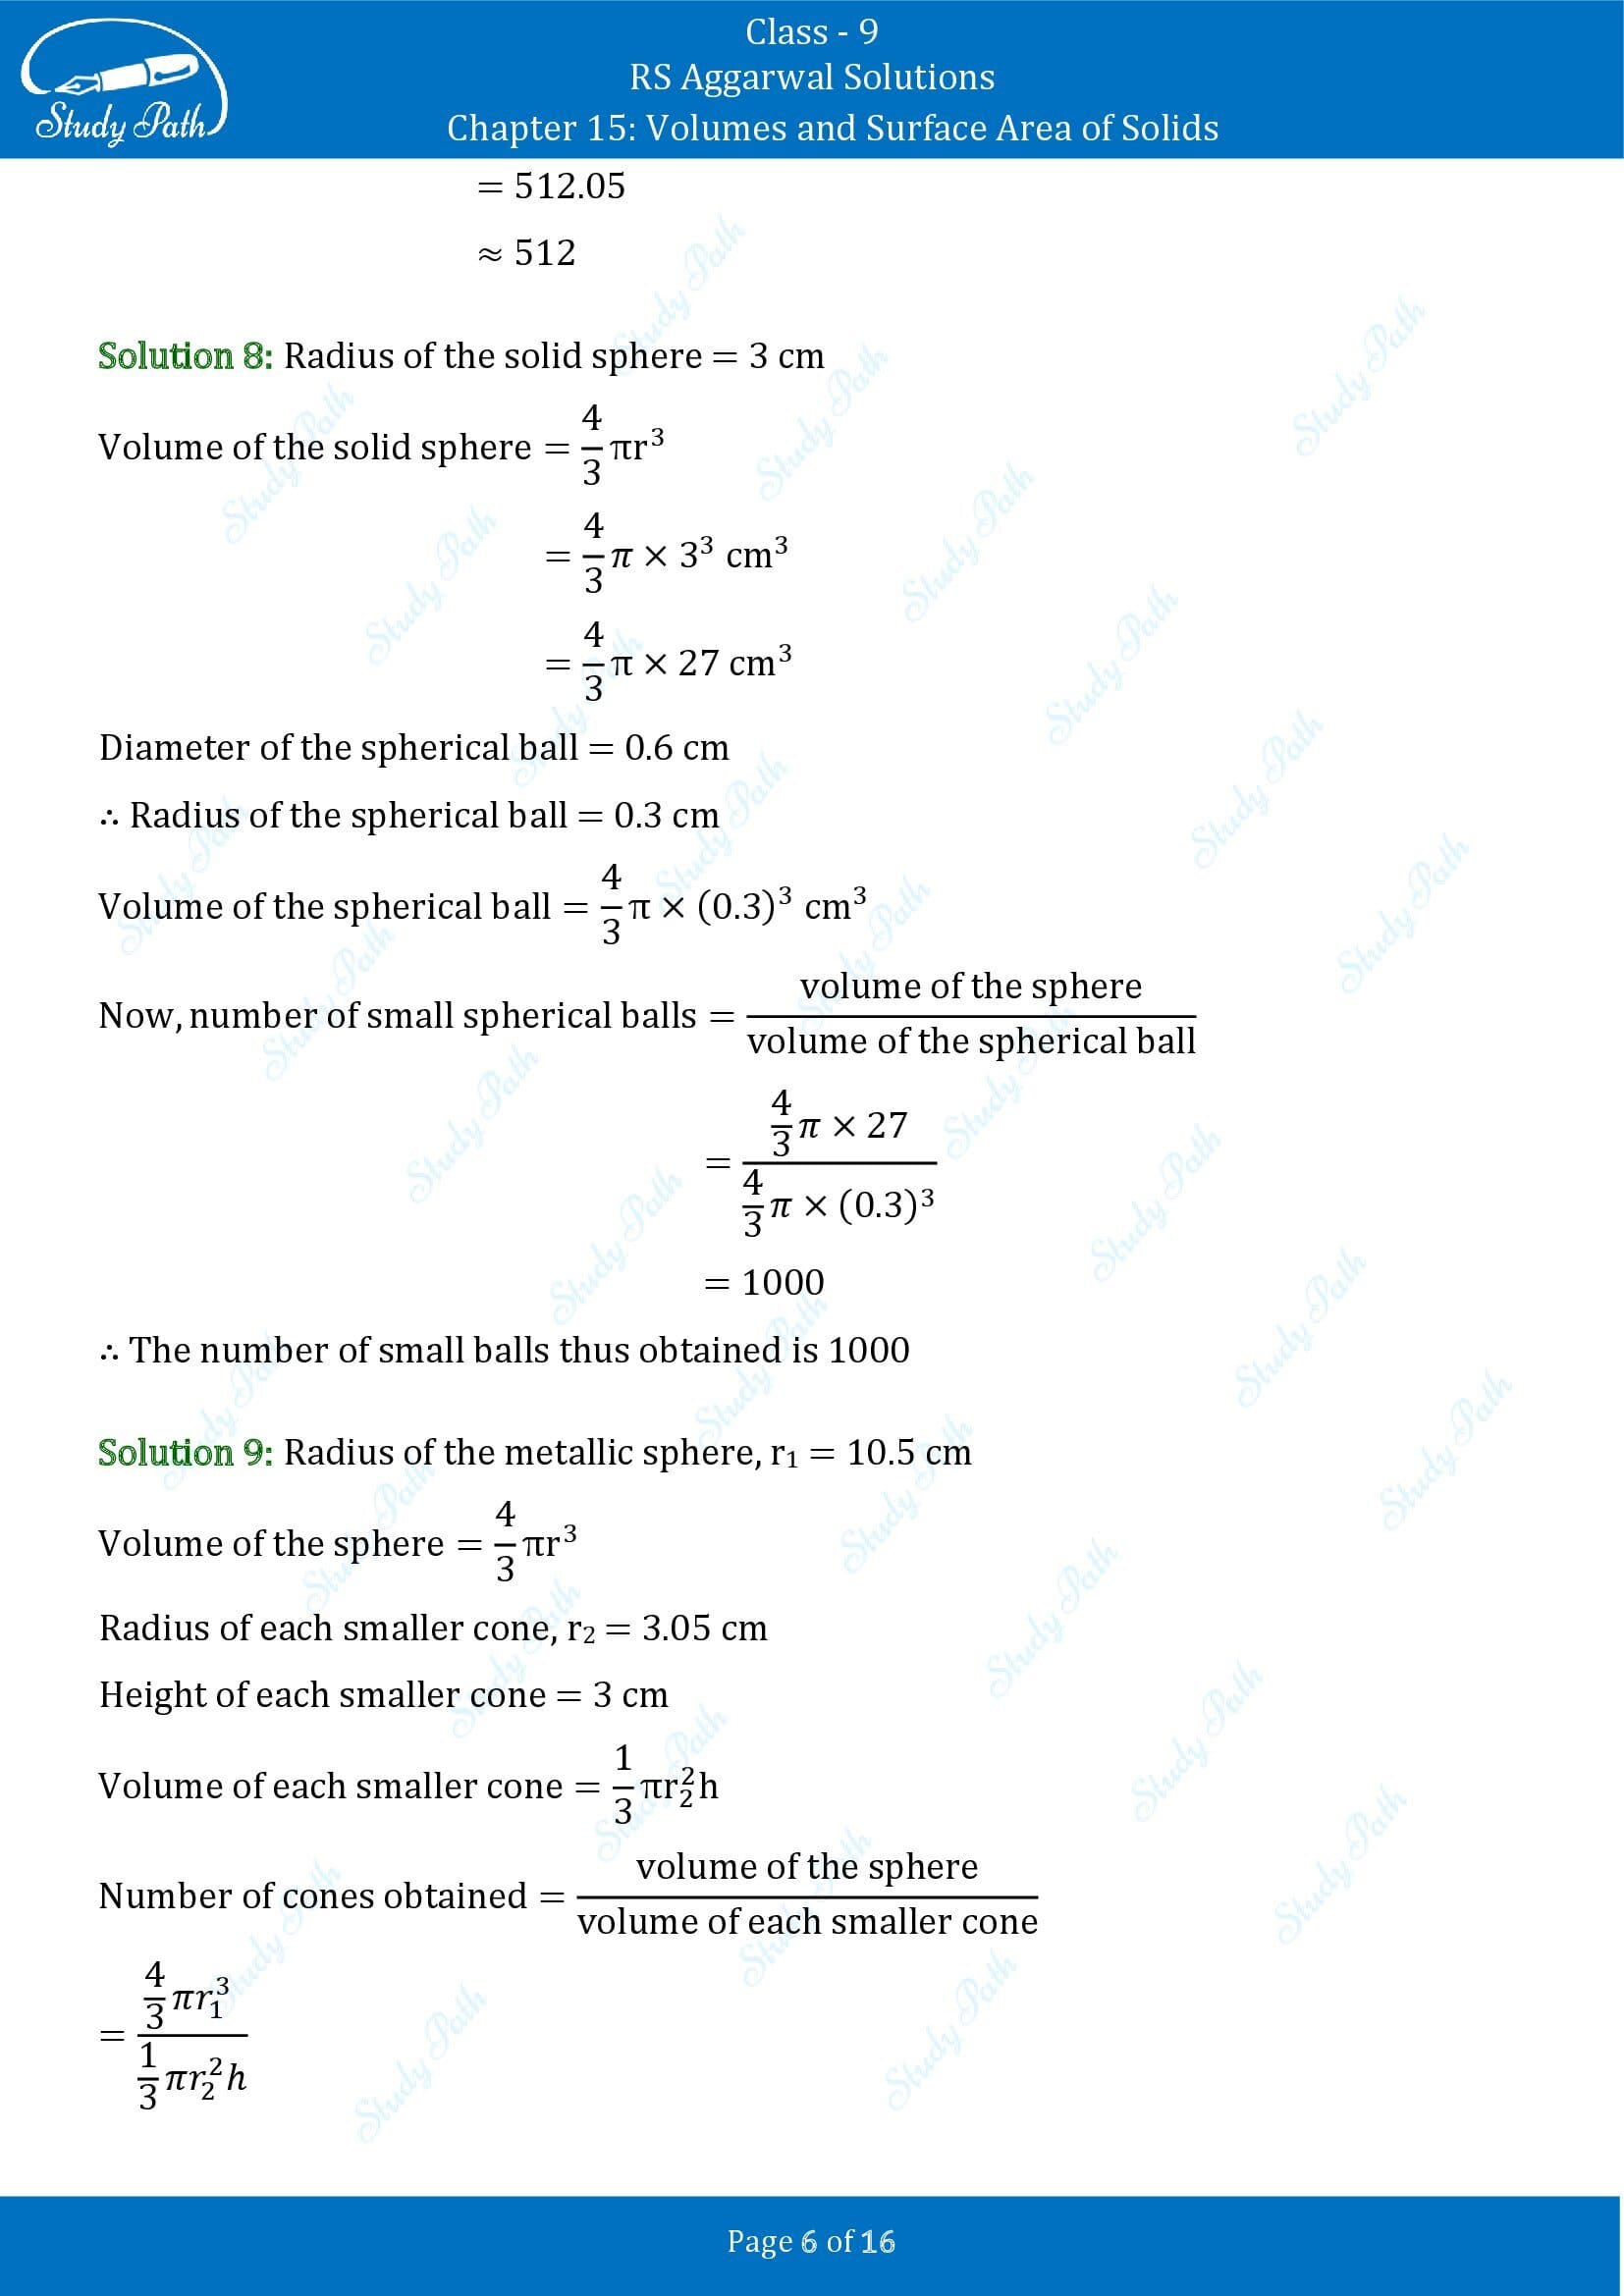 RS Aggarwal Solutions Class 9 Chapter 15 Volumes and Surface Area of Solids Exercise 15D 00006